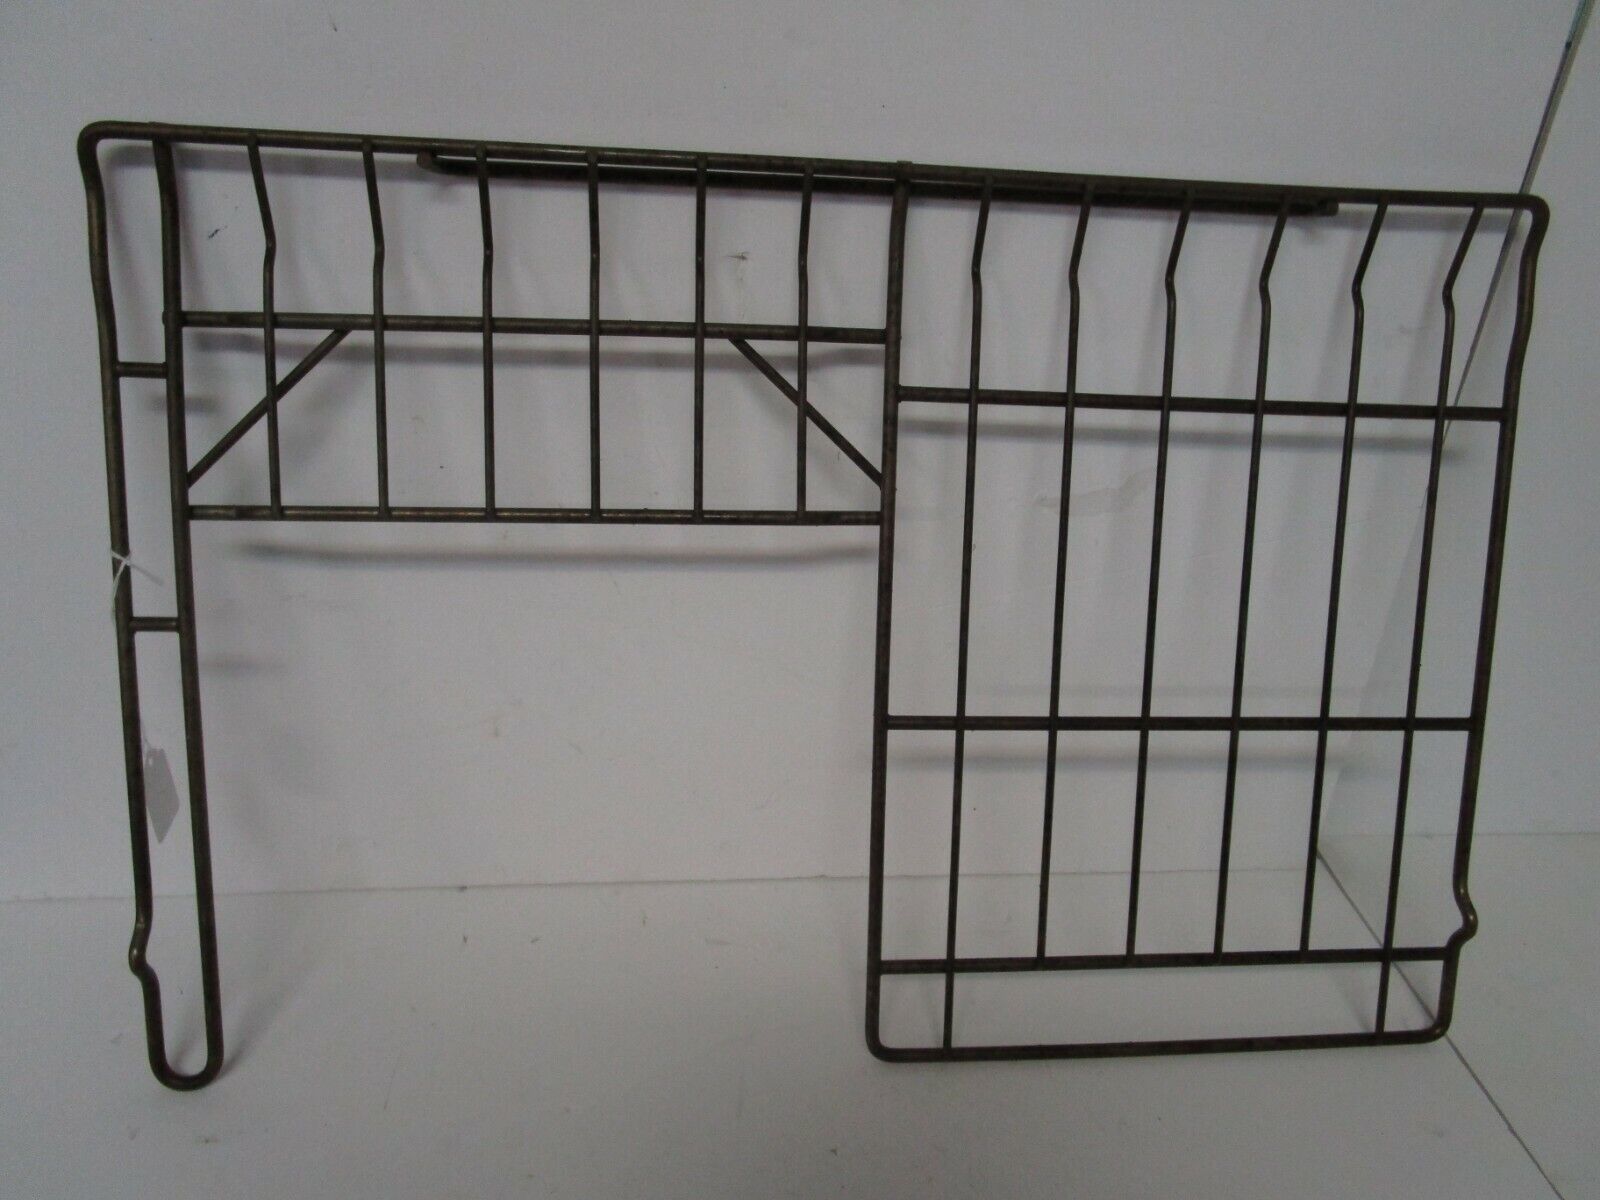 USED Frigidaire Range Oven Rack and Rack Insert. Part #316425600 and Part #316419400